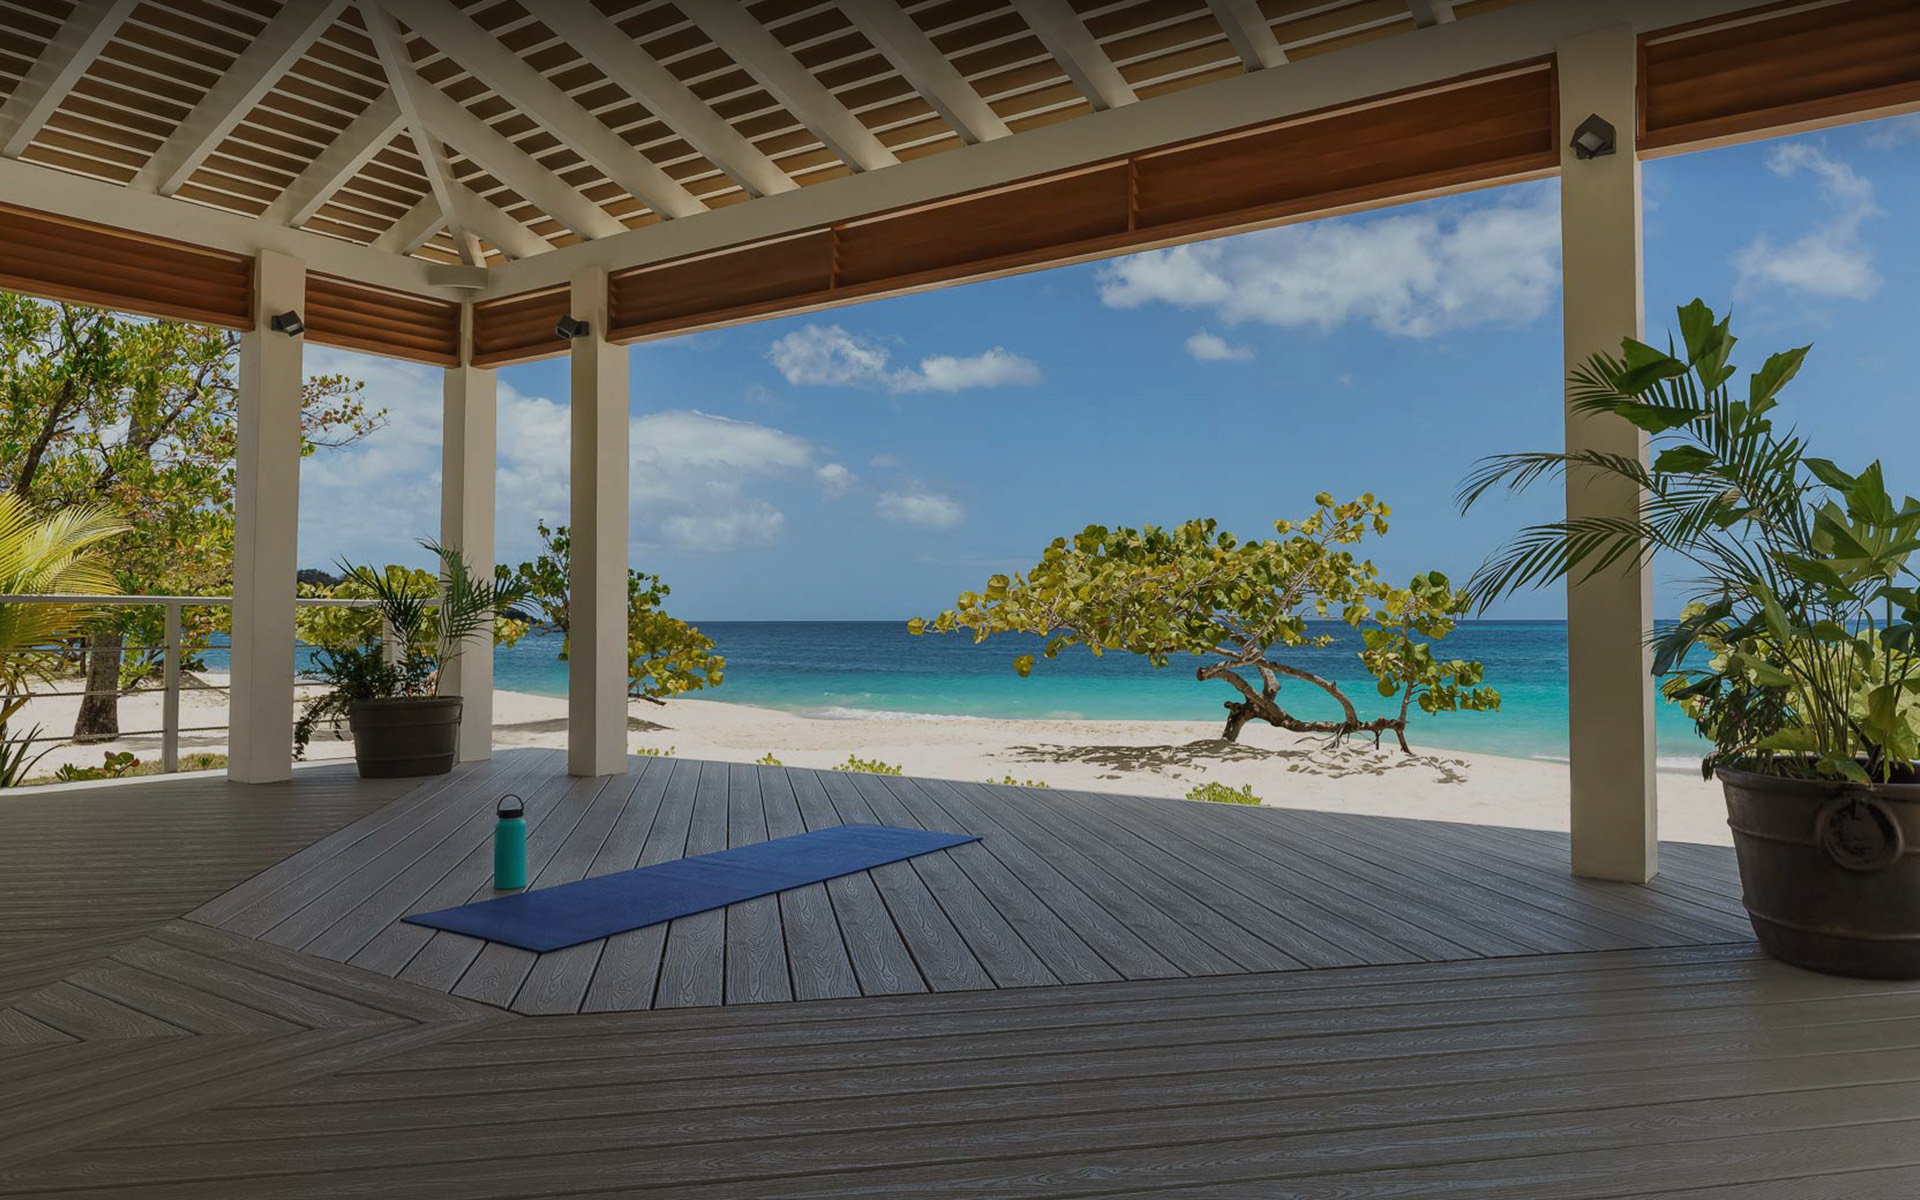 view of a yoga mat on a pavilion with the beach in the background